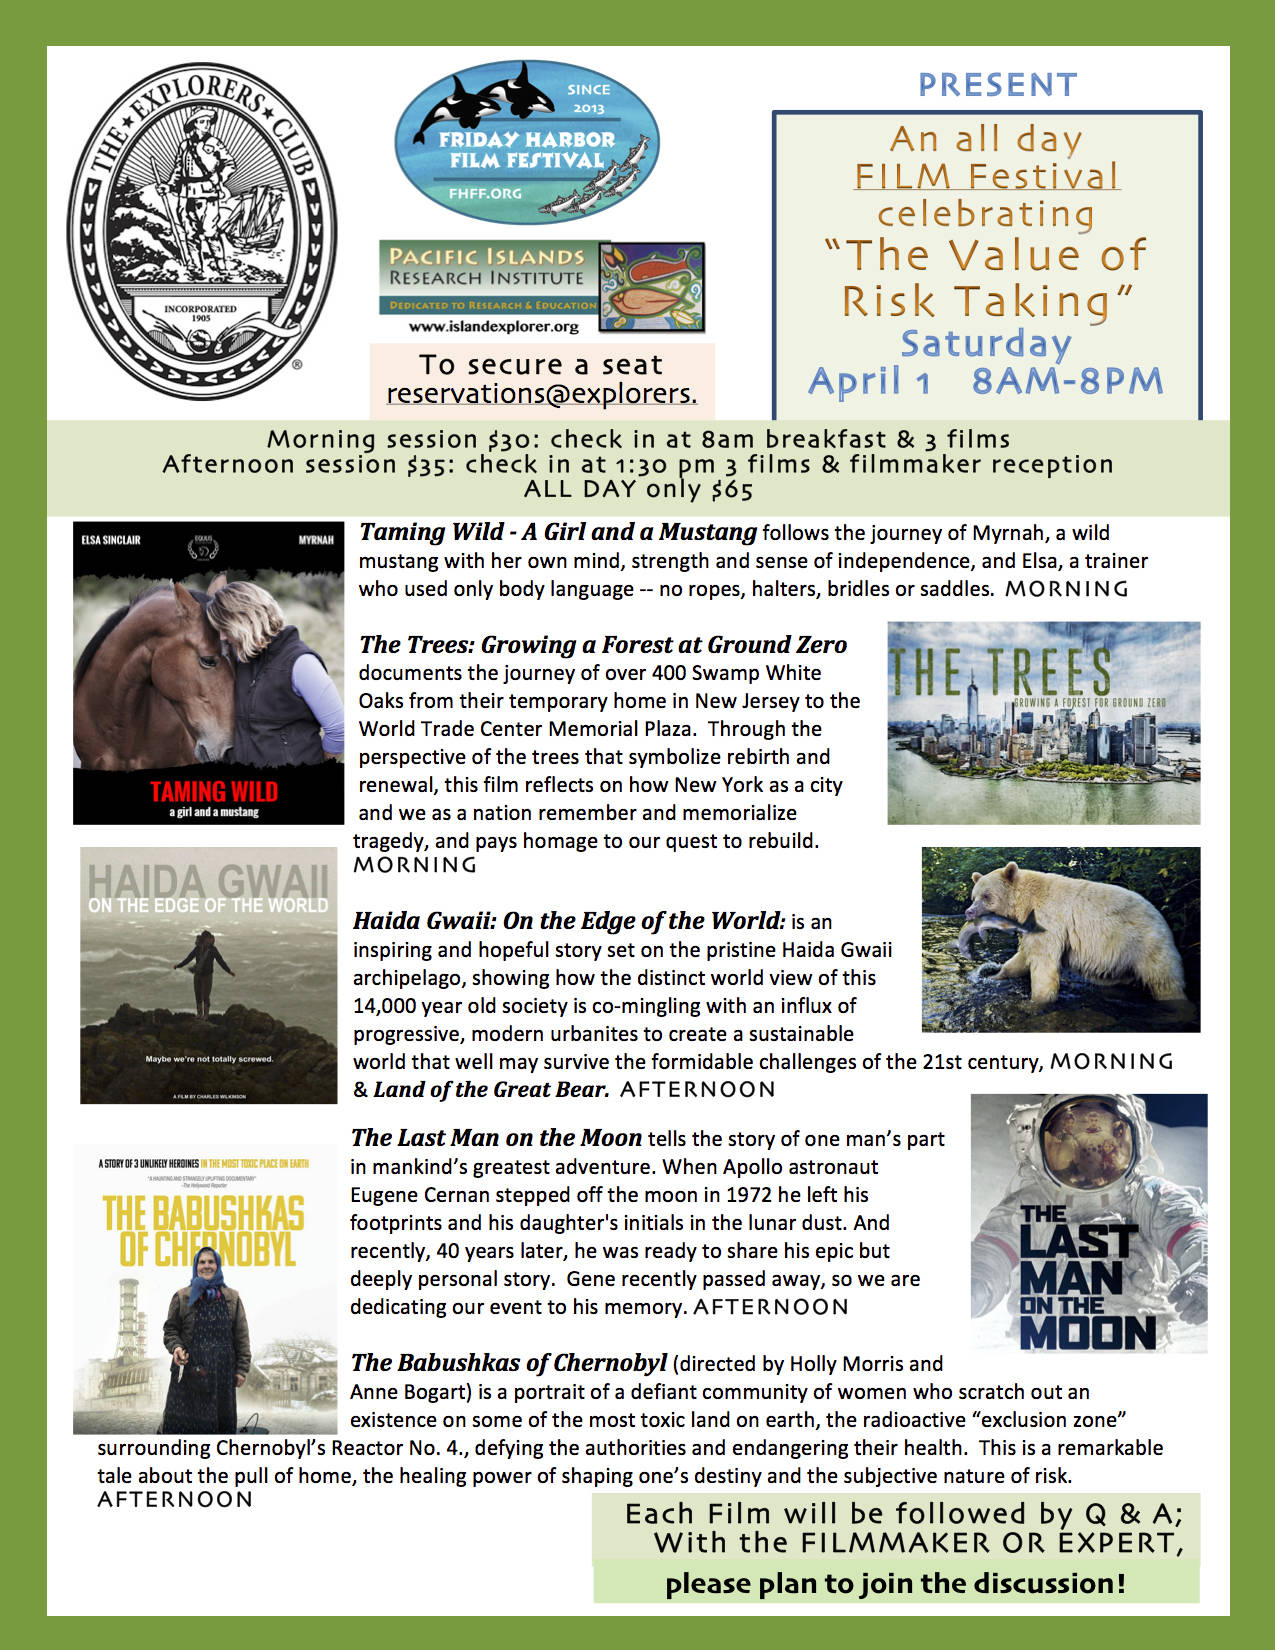 Friday Harbor Film Festival heads to NYC